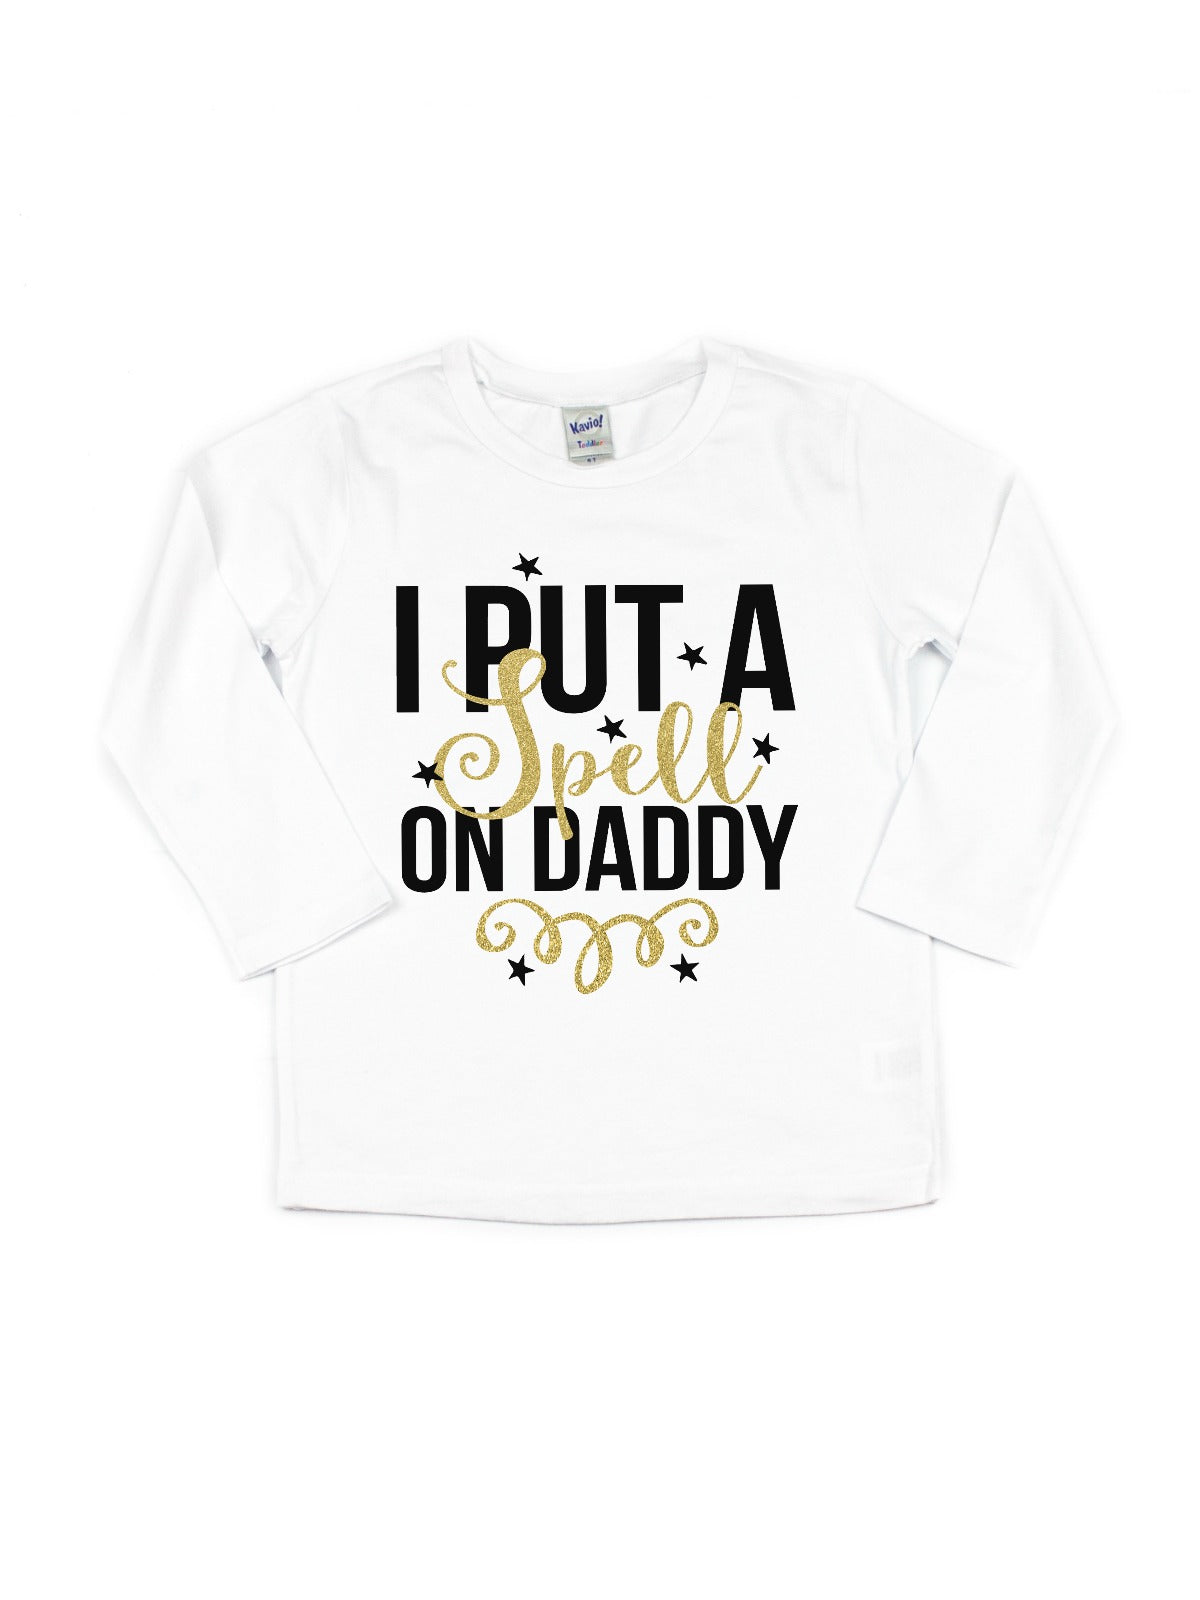 I put a spell on daddy girl's Halloween shirt gold and black